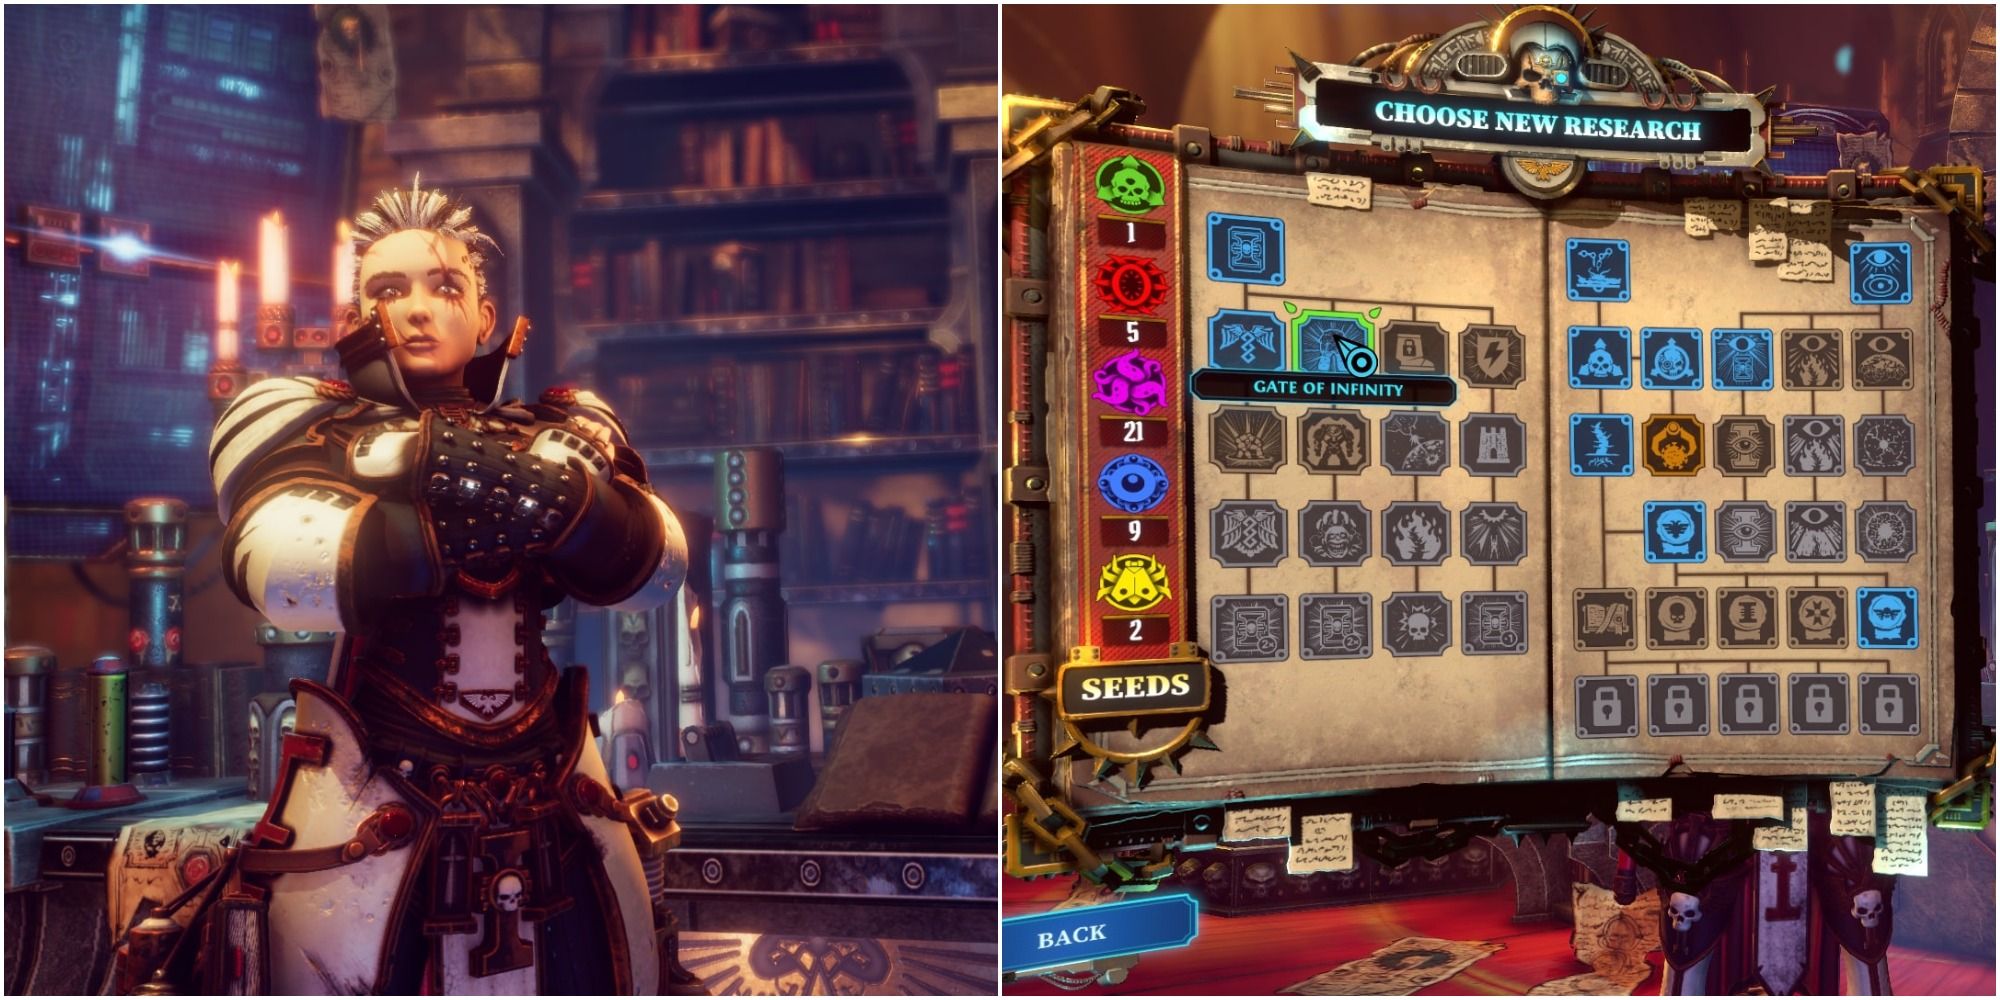 Chaos Gate collage of Inquisitor Vakir and the Research screen